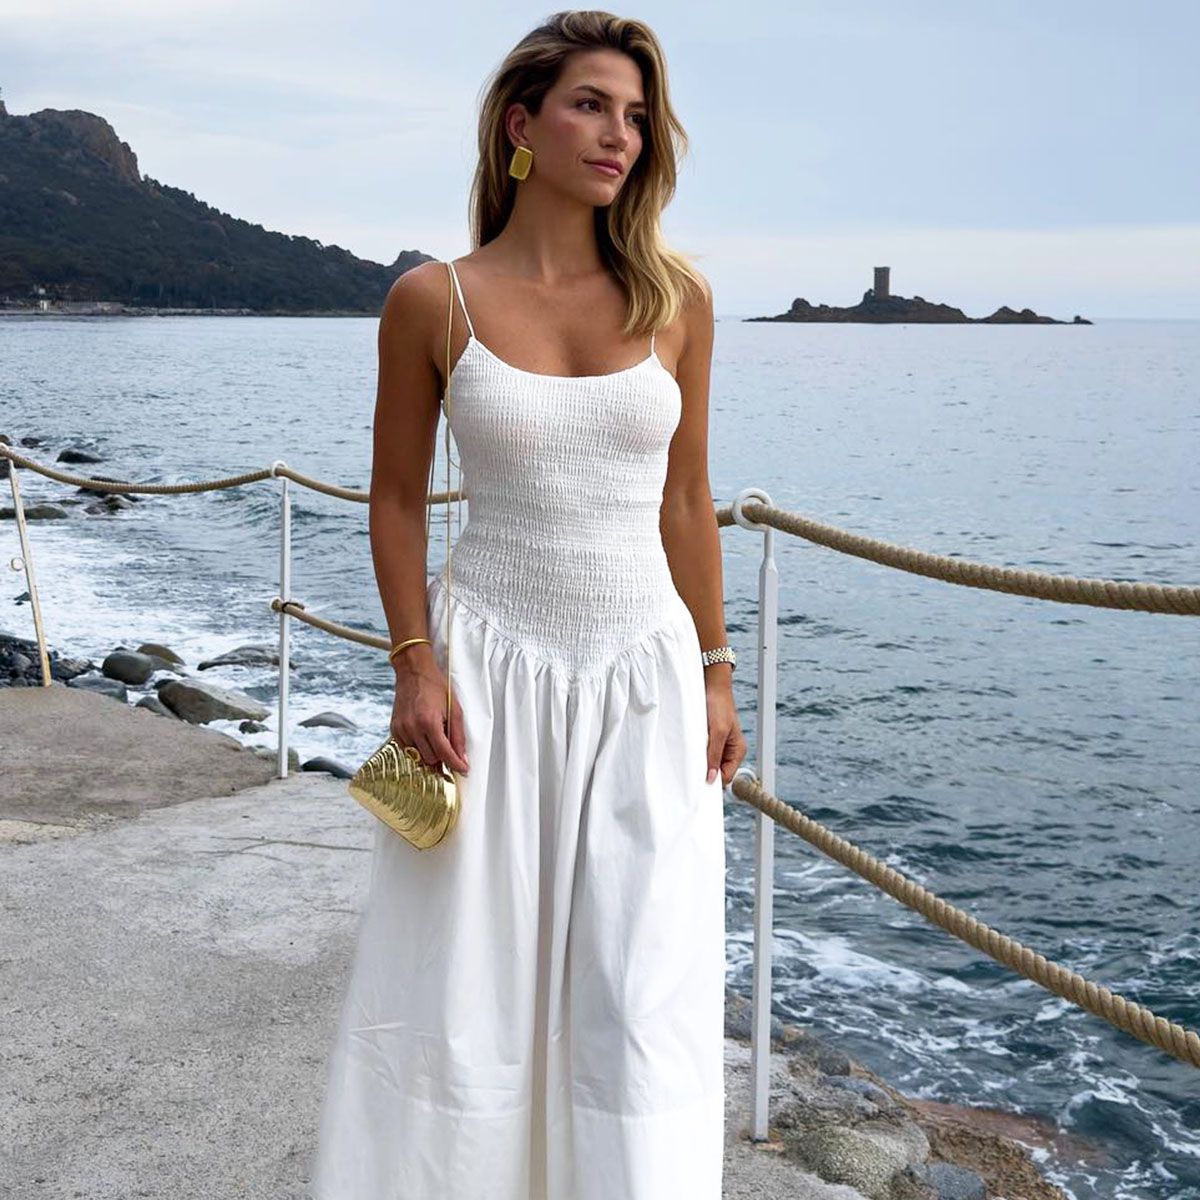 The White Zara Midi Dress I'm Currently Obsessed With